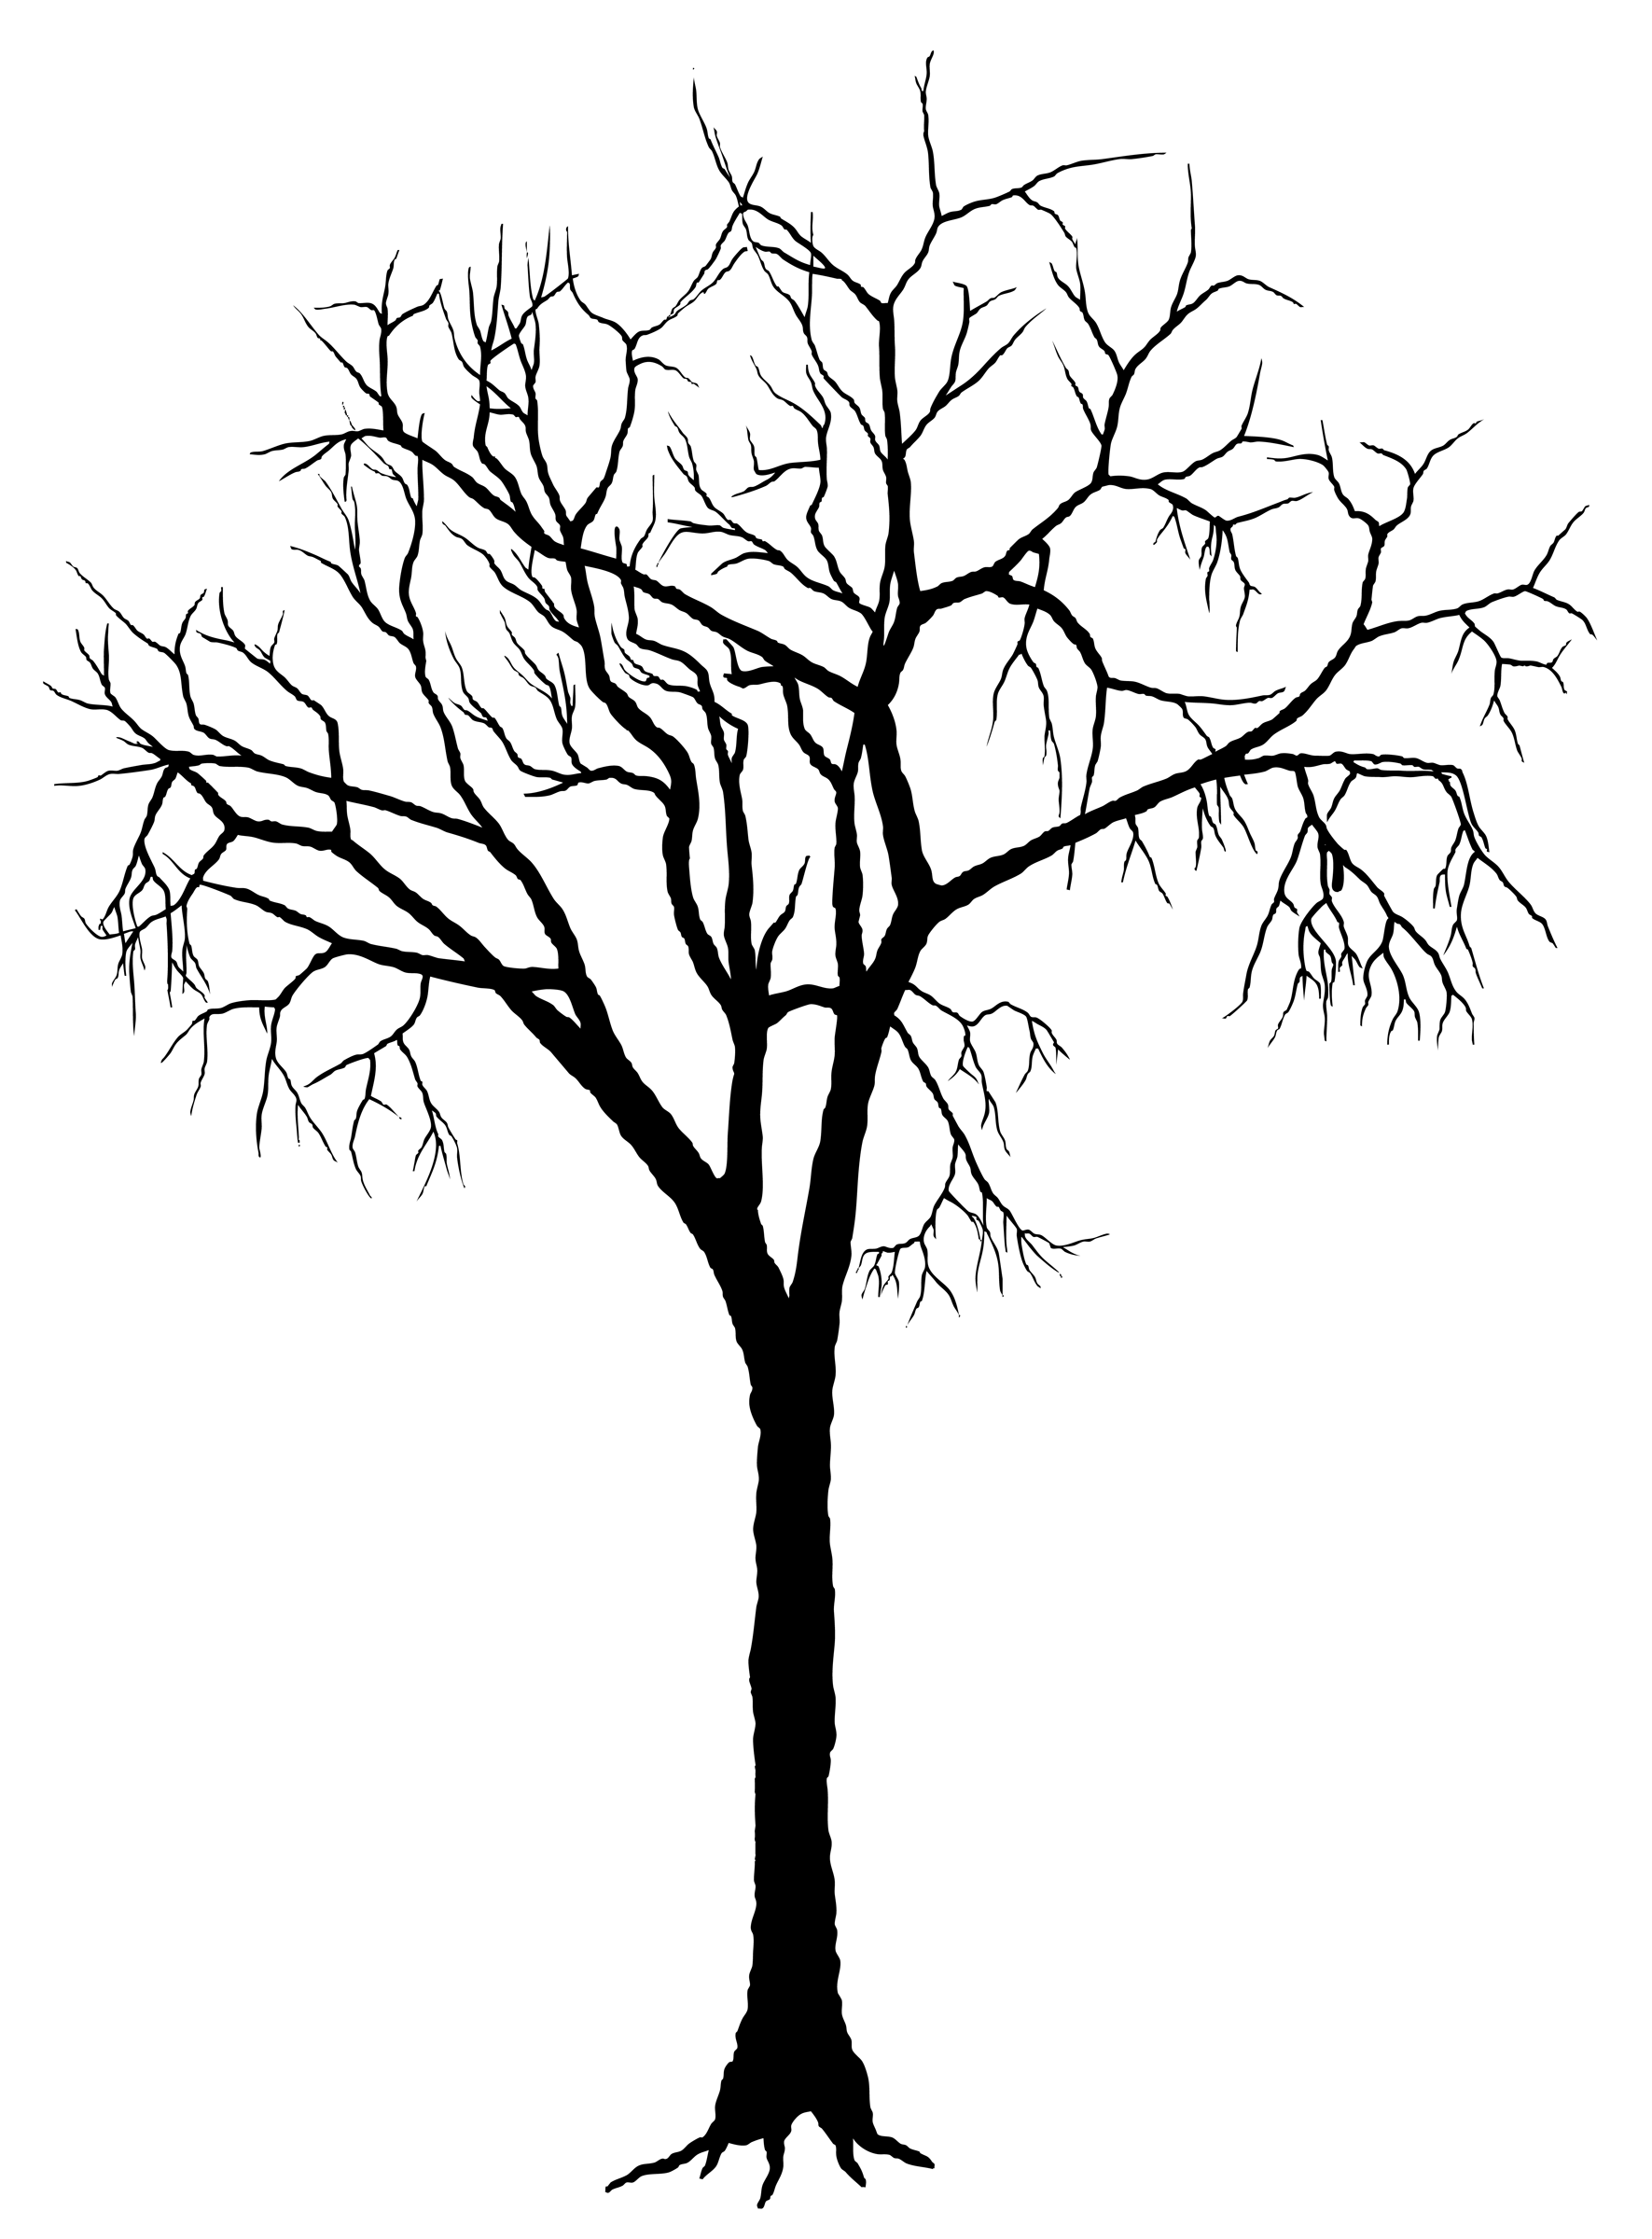 Free Simple Tree Silhouette, Download Free Clip Art, Free.